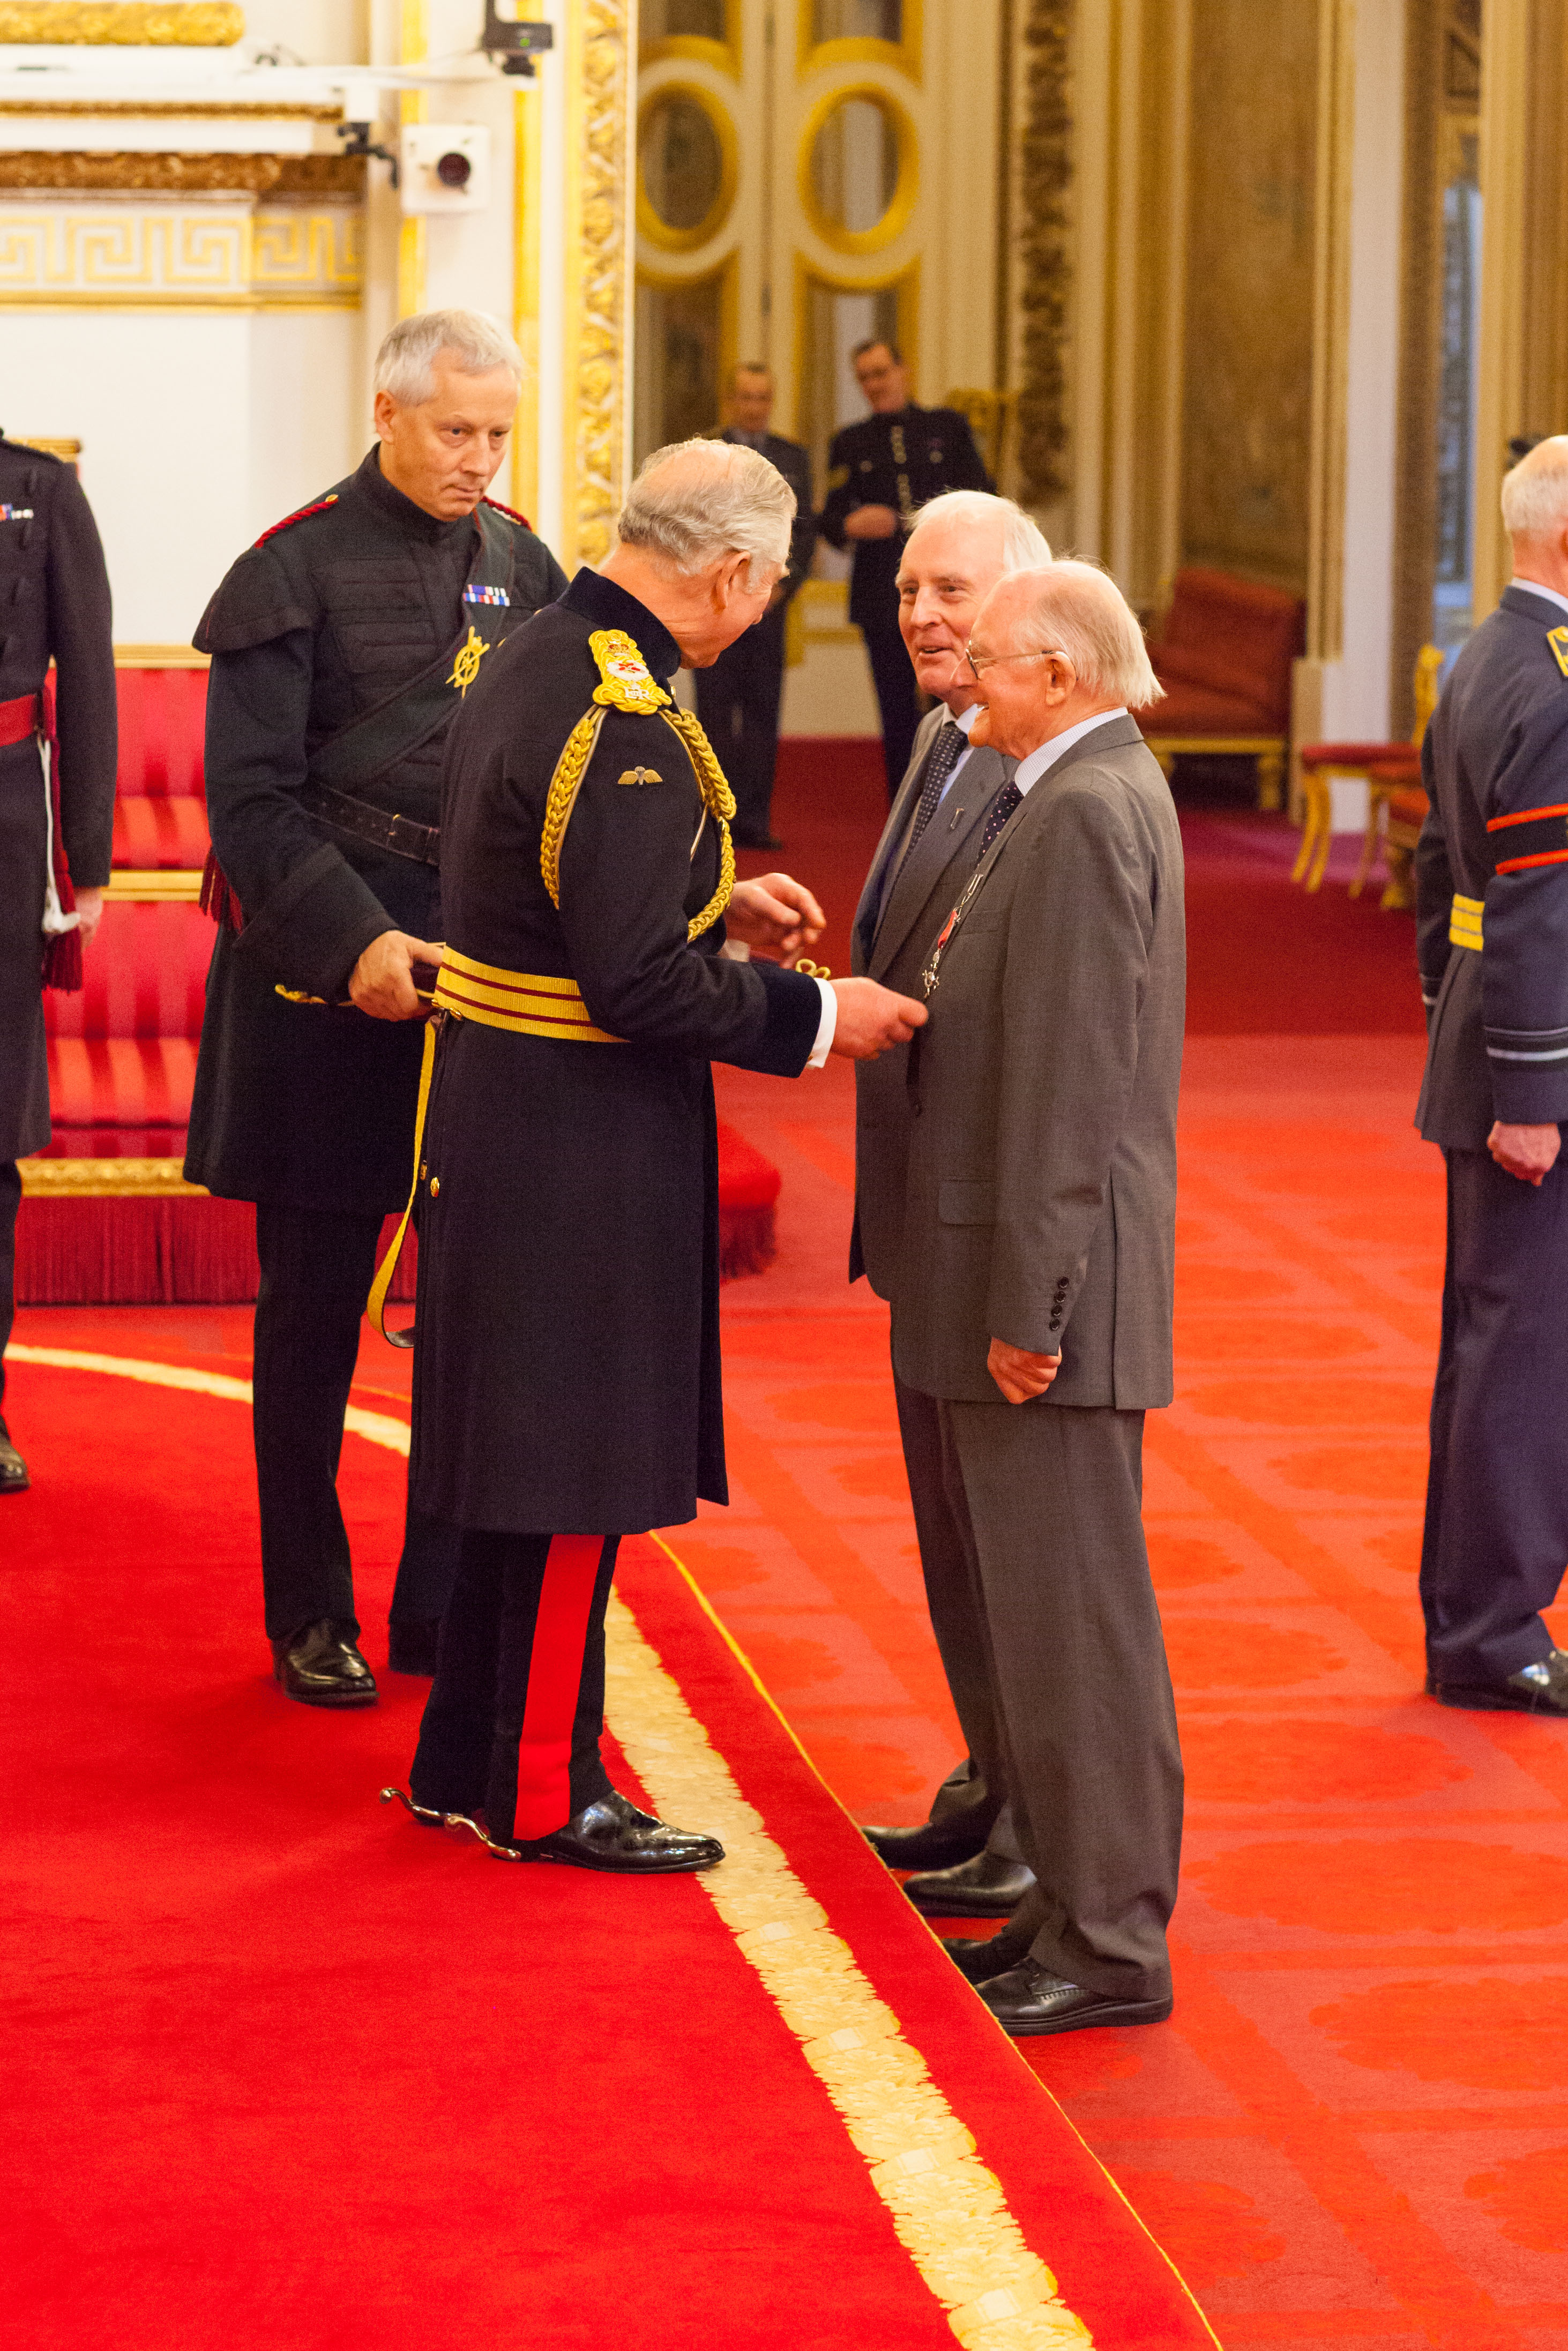 Mr. Alan Stannah and Mr. Brian Stannah are awarded their MBE (Member of the Order of the British Empire) medals by the Prince of Wales at Buckingham Palace.